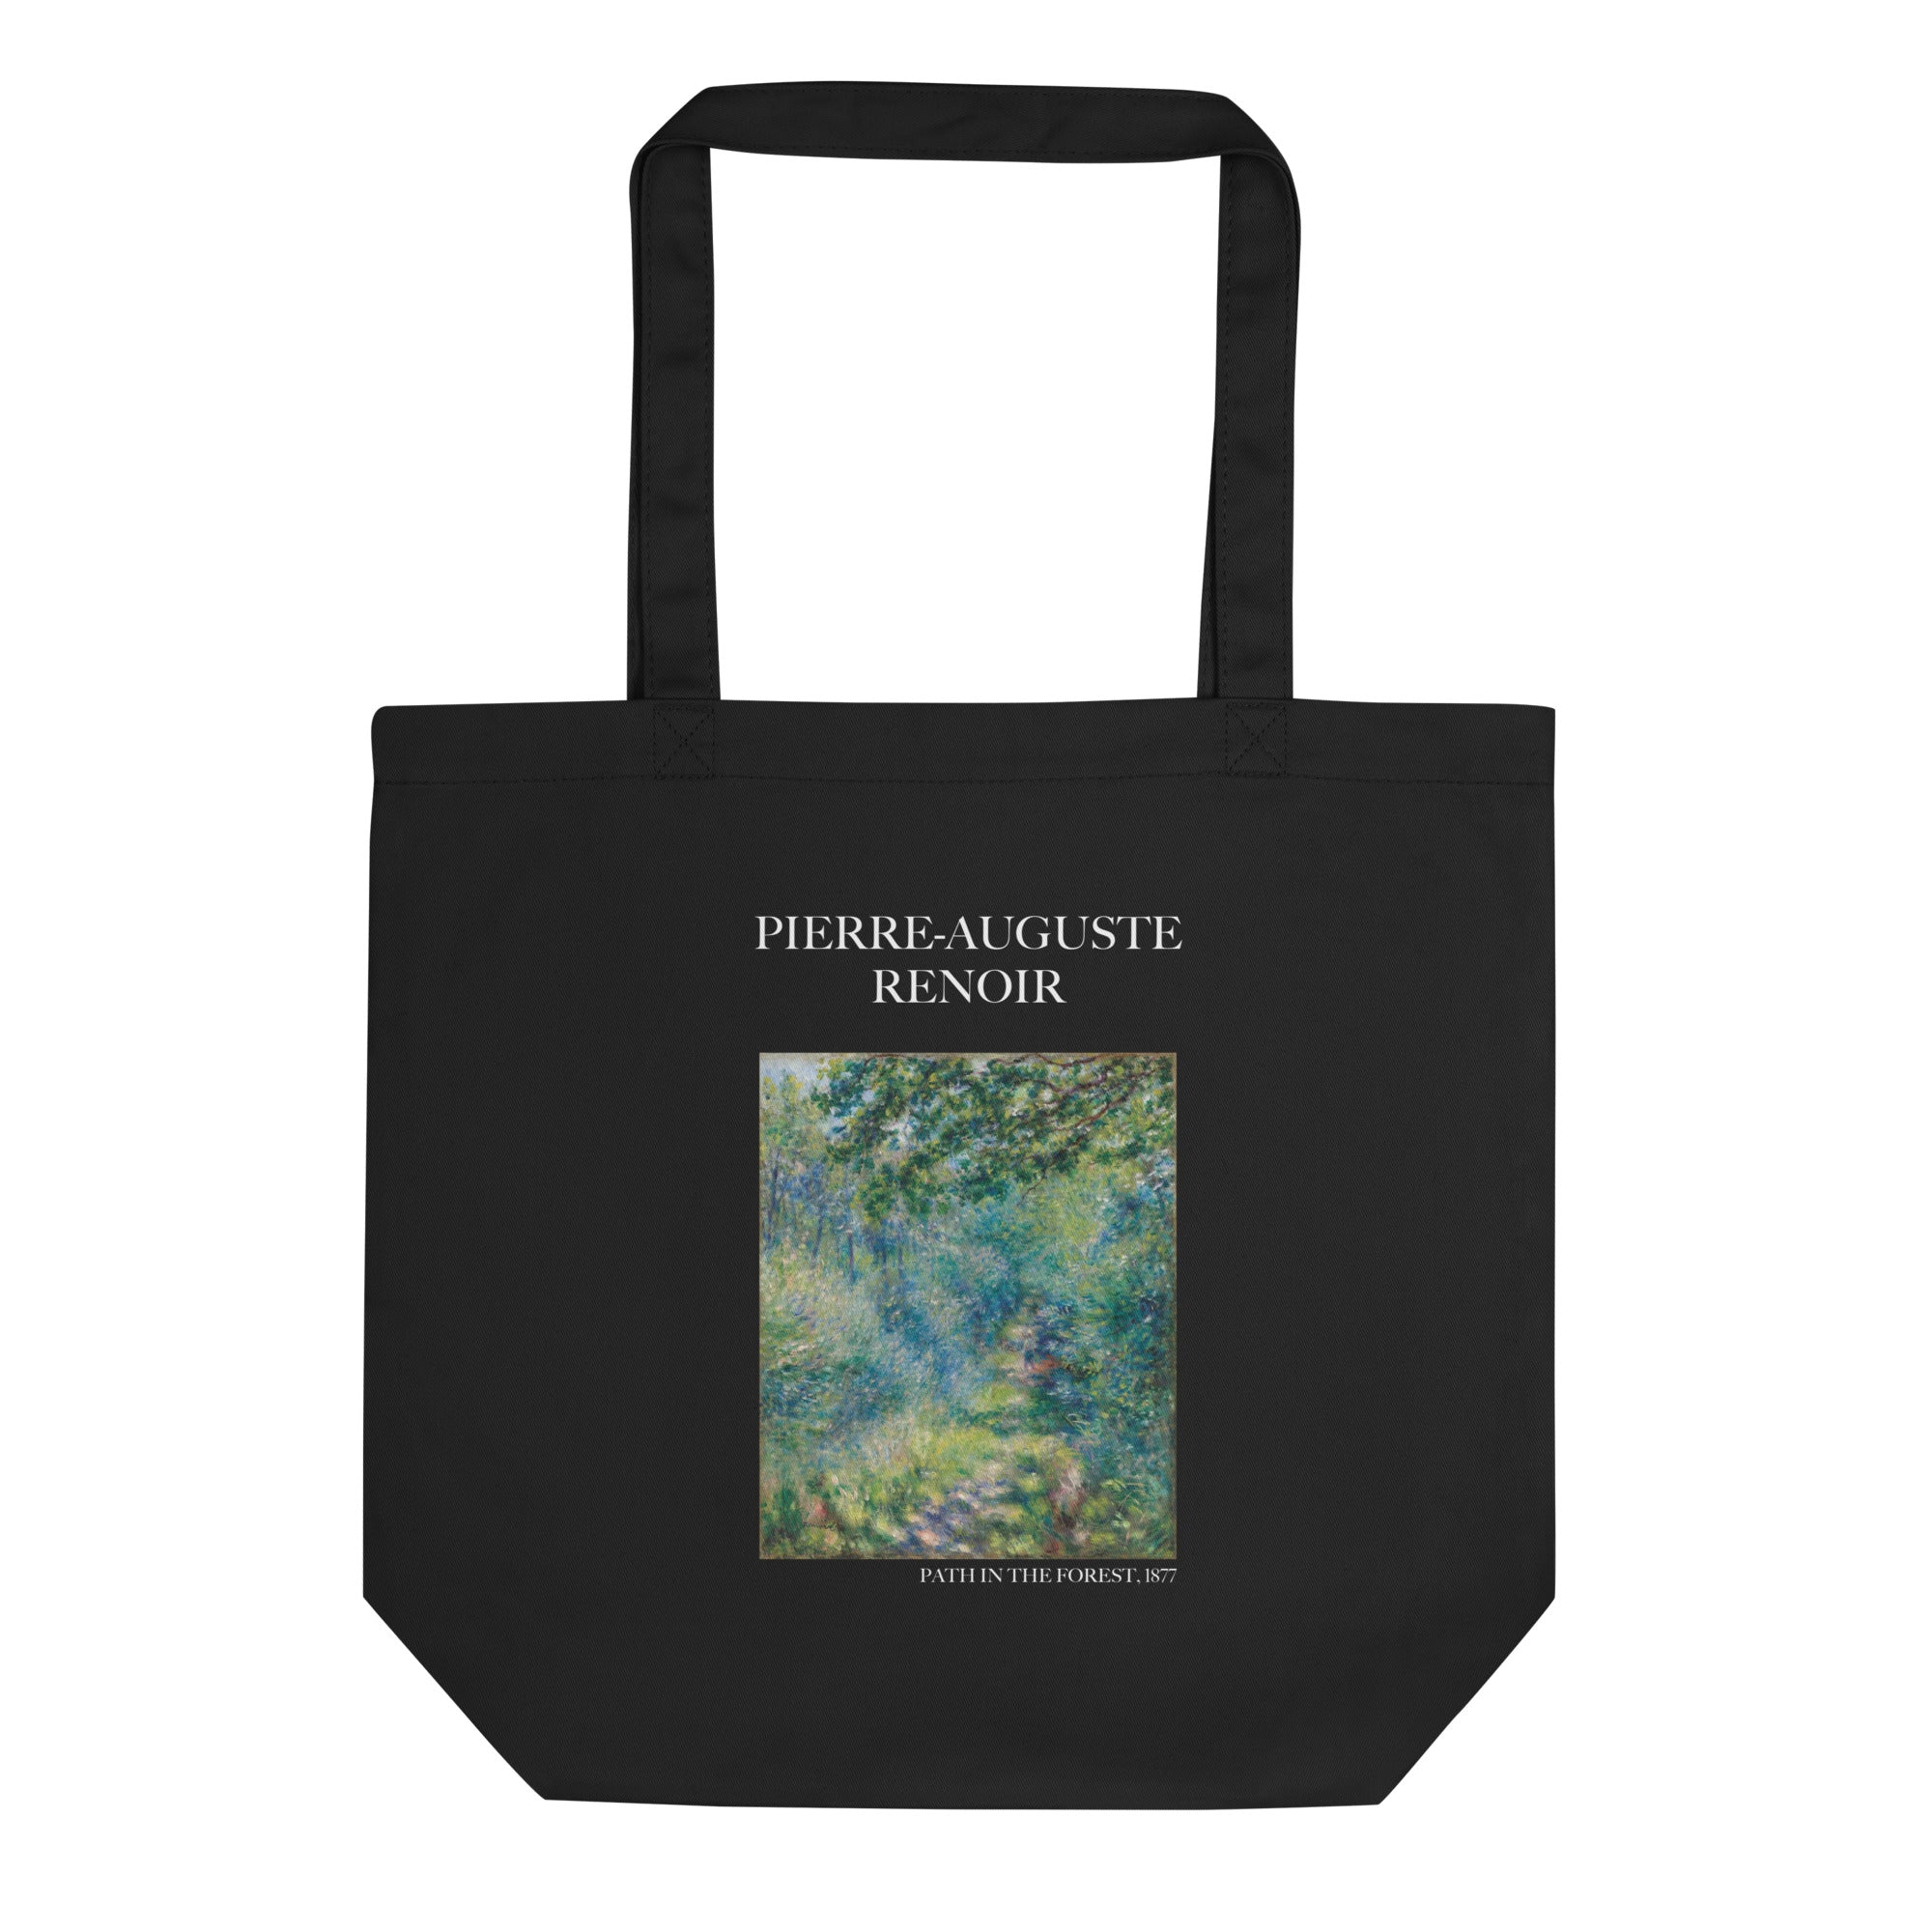 Pierre-Auguste Renoir 'Path in the Forest' Famous Painting Totebag | Eco Friendly Art Tote Bag